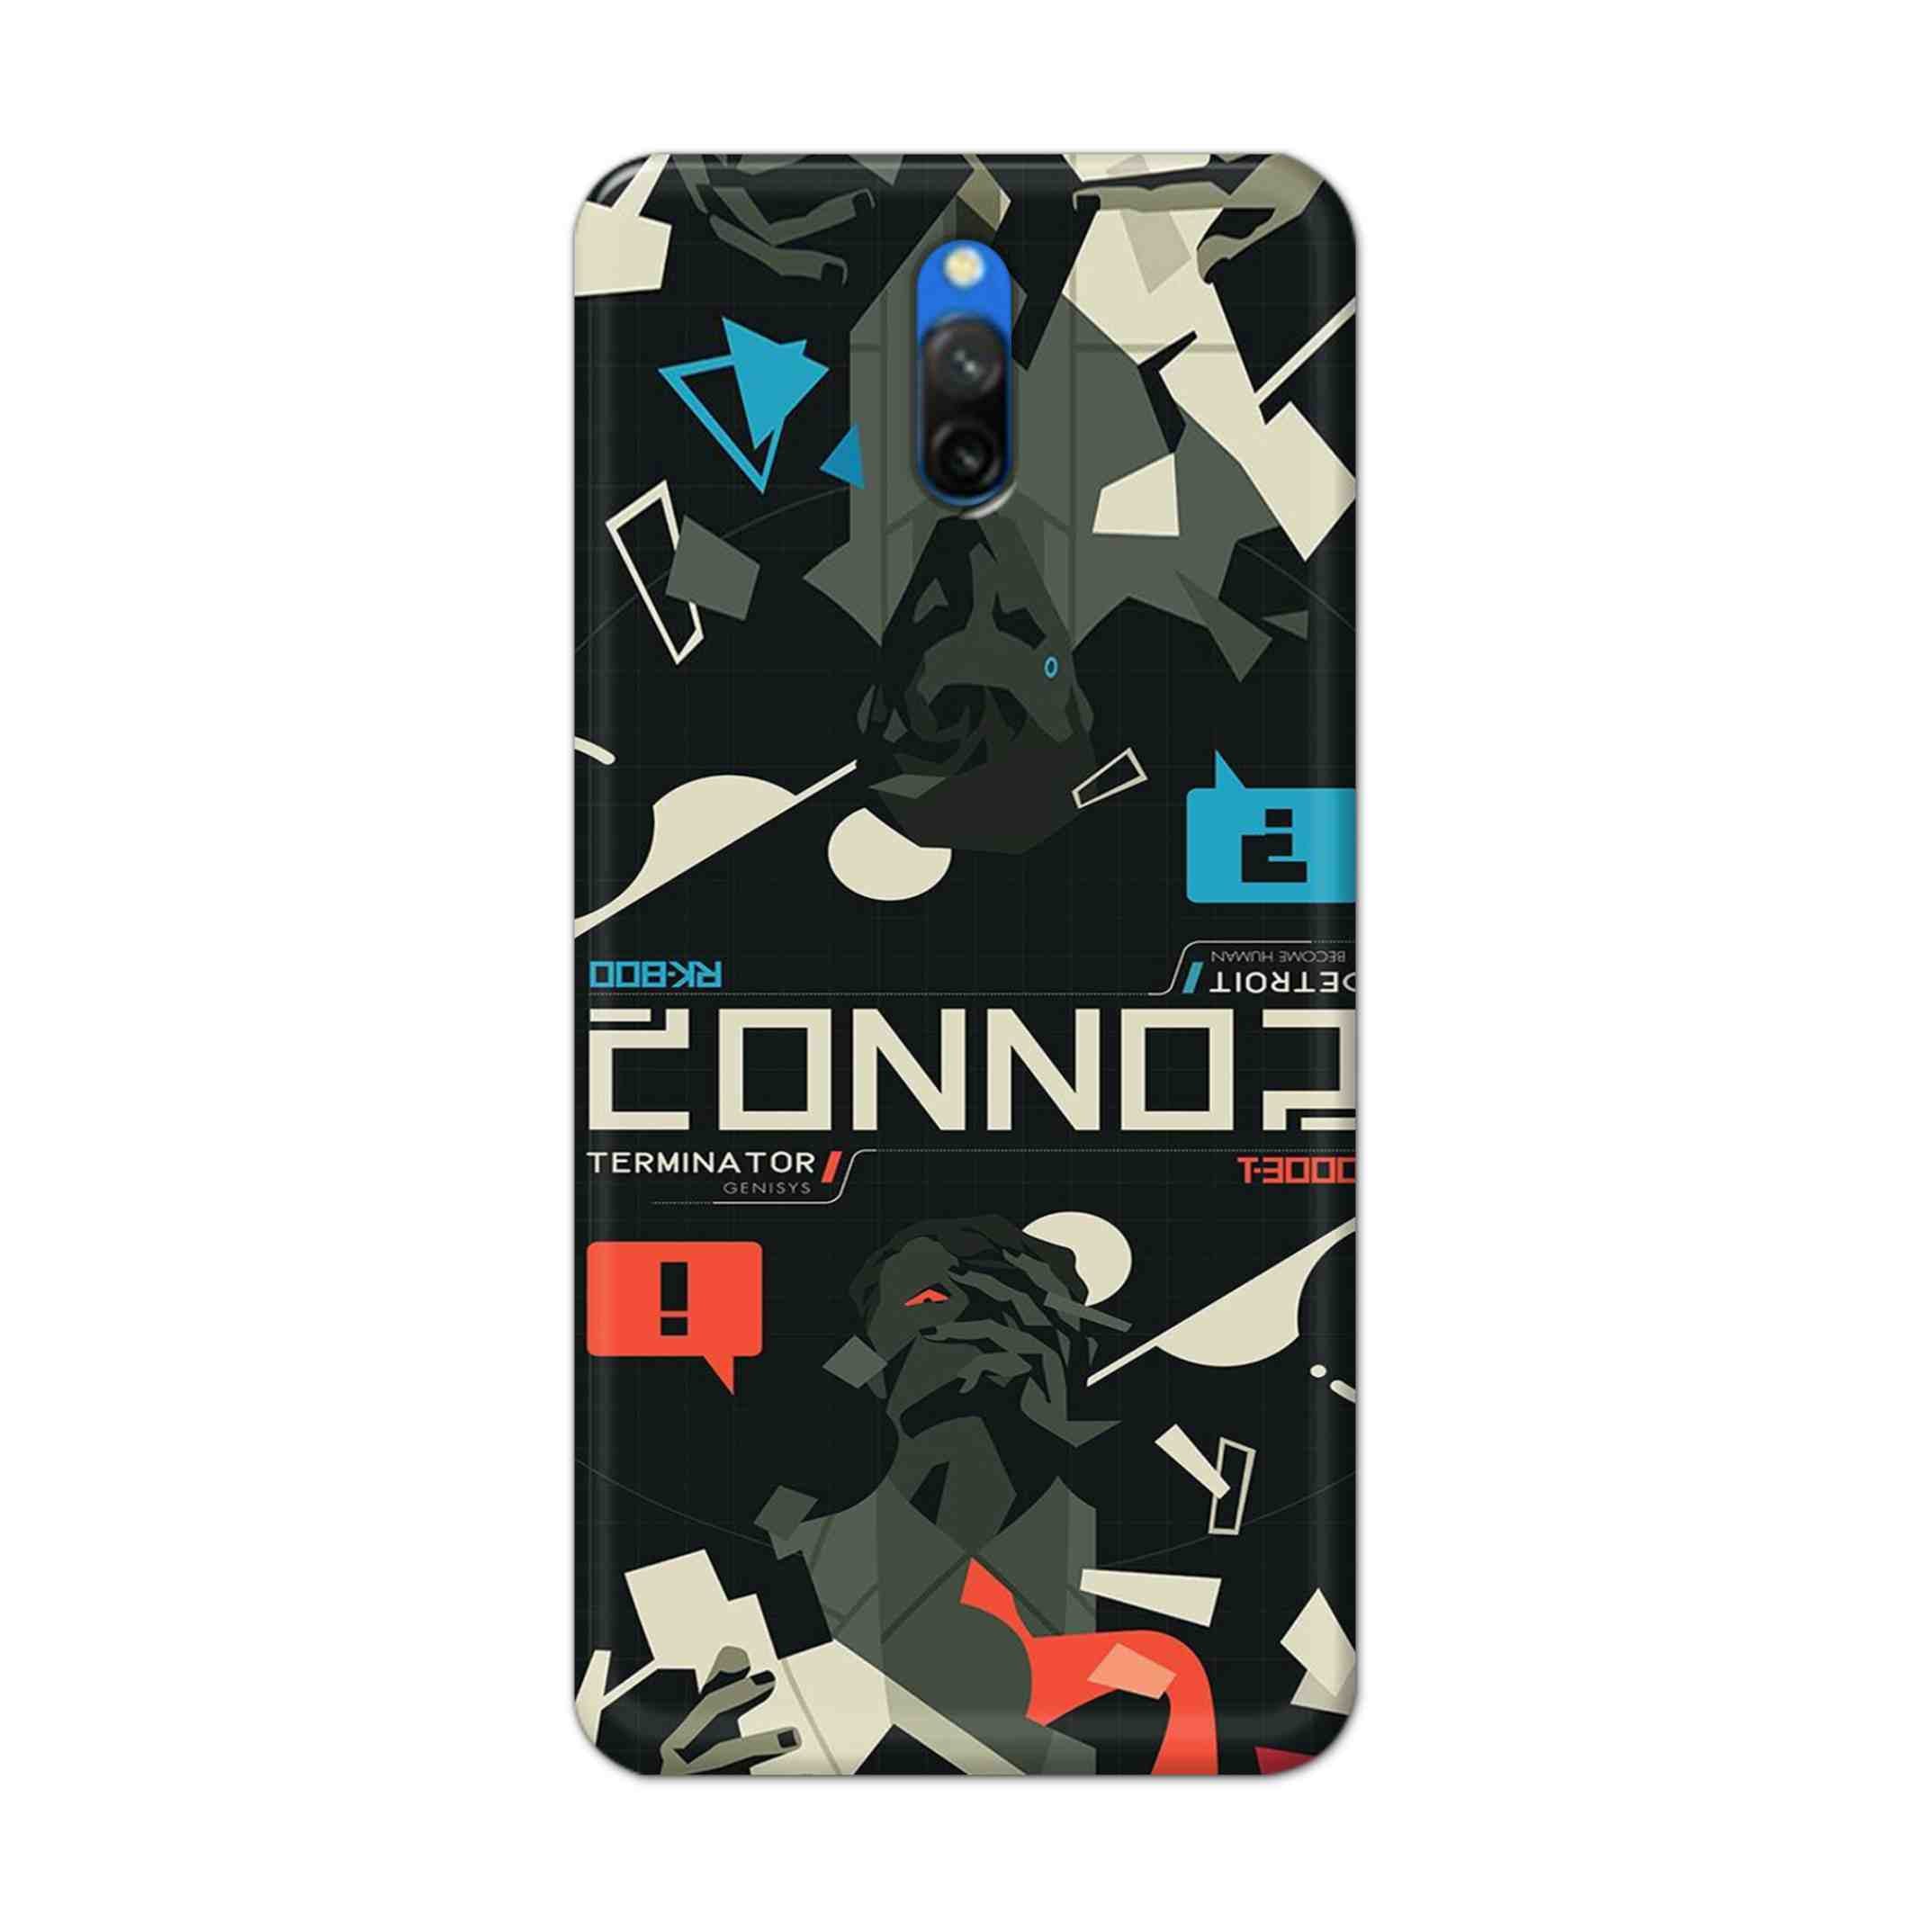 Buy Terminator Hard Back Mobile Phone Case/Cover For Redmi 8A Dual Online